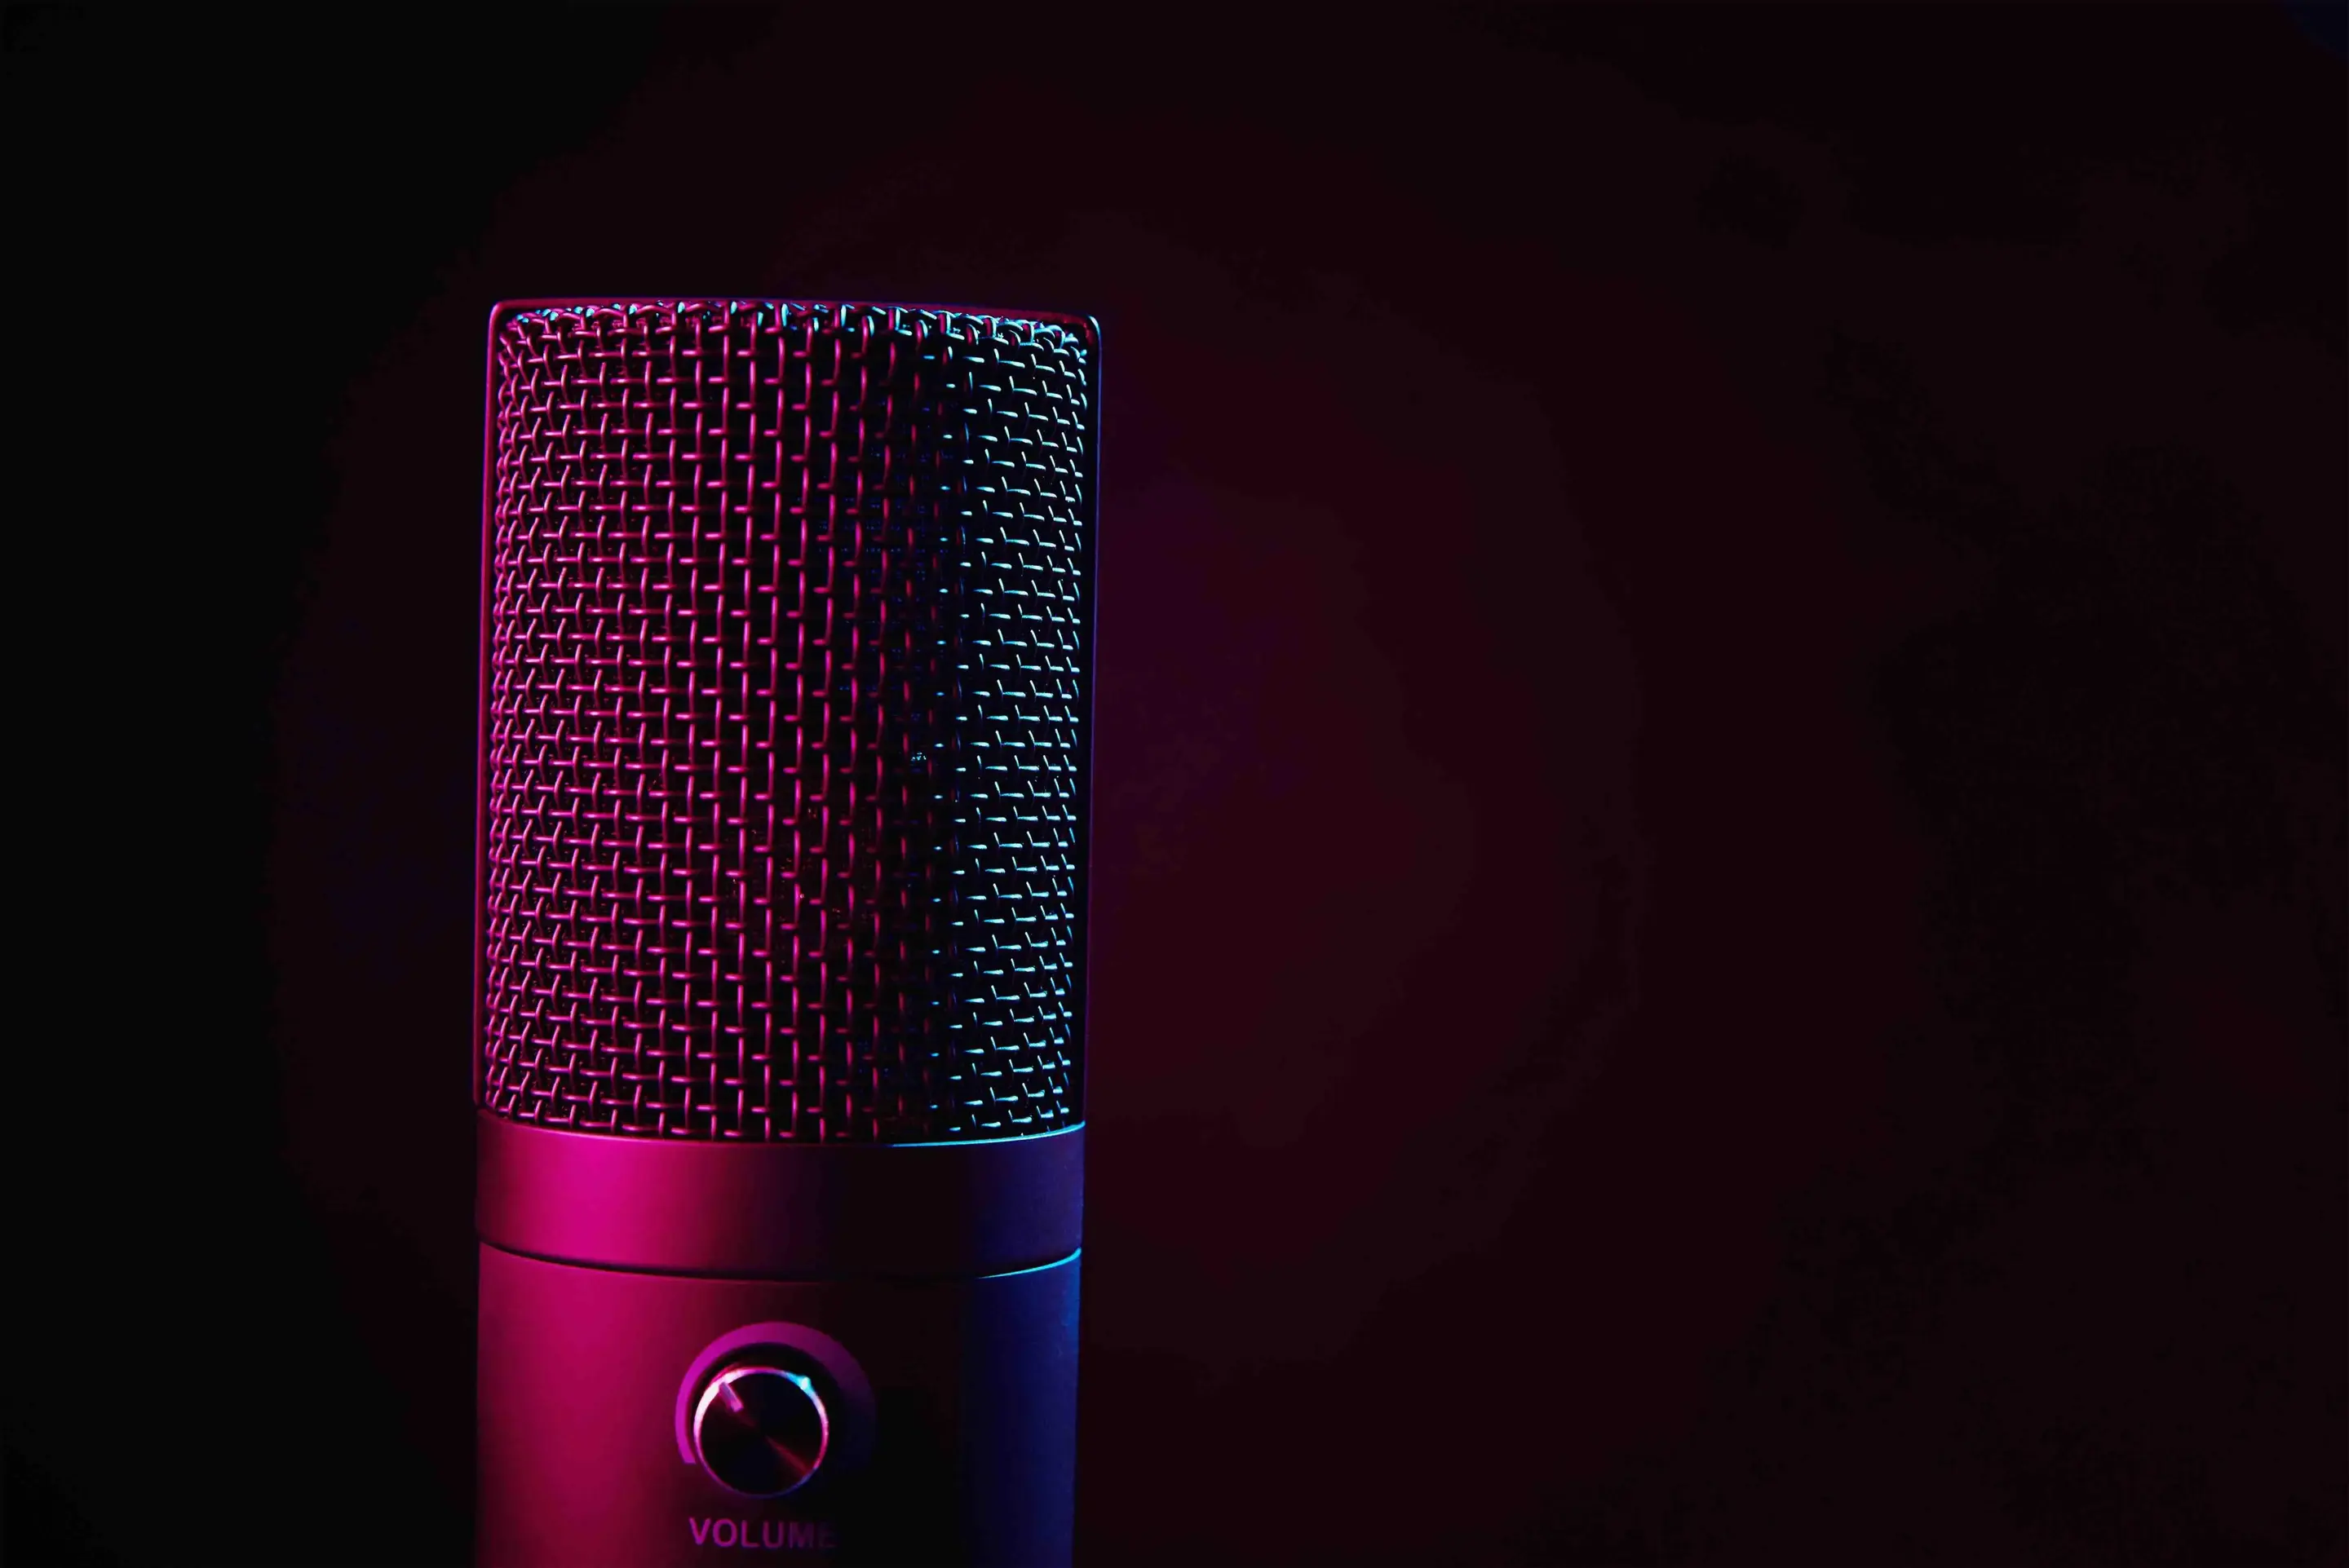 A studio microphone against a black background, lit with pink light in the foreground